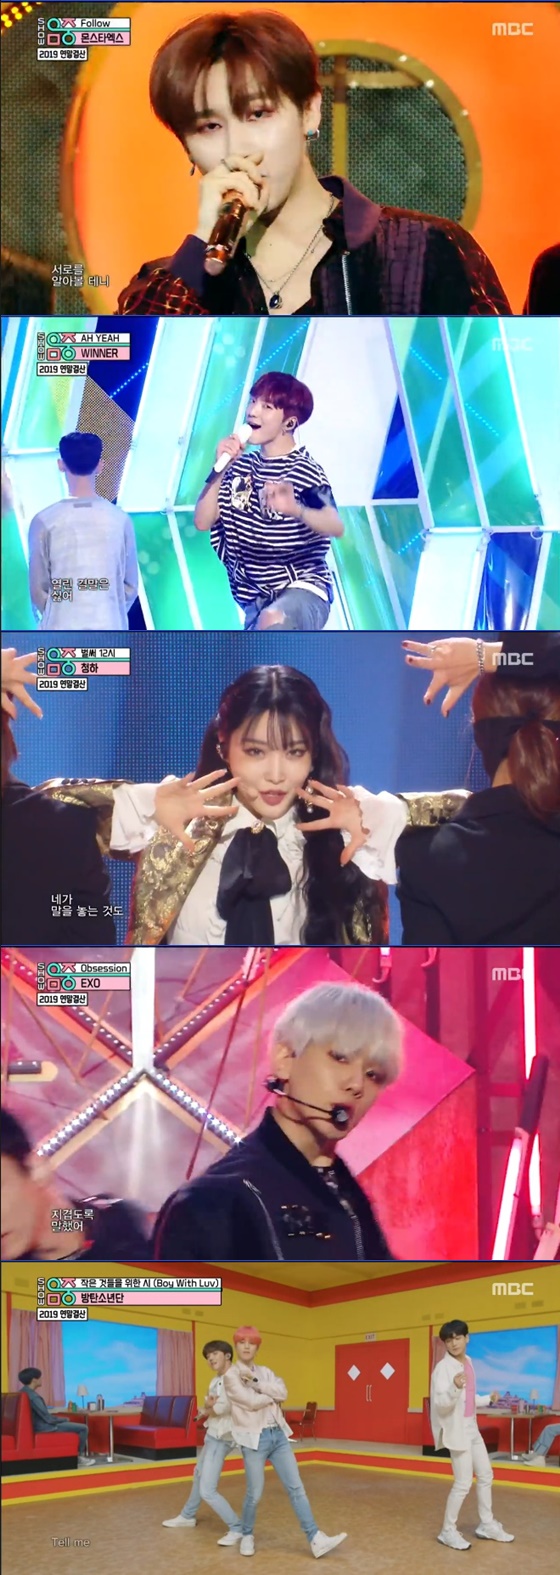 MBCs music ranking program Show! Music Core, which was broadcast on the afternoon of the 28th, was decorated with the 2019 year-end settlement.K-POP singers who have been hot this year have been out.On the day of the show, Mina, a member of the MC, asked, You have a little 2019 degree left. Do you feel it?Music Core will have time to look back on the stage of the singers who have been loved so much this year. NCT 127, Monster X, was named as the group that thrilled The Earrings of Madame de..., as well as Winner and Godseven.If there was a group that thrilled The Earrings of Madame de... there was a singer who shot the penis: Cheongha, Black Pink, Twice and Red Velvet.Finally, the first-place Singer relay stage that shone 2019 Show! Music Core was followed.Mamma Mu, who ranked first in the group solo for the first time this year, EXO, who ranked first for the second consecutive week with complete body, and BTS, who ranked first for the ninth consecutive week, were drawn.